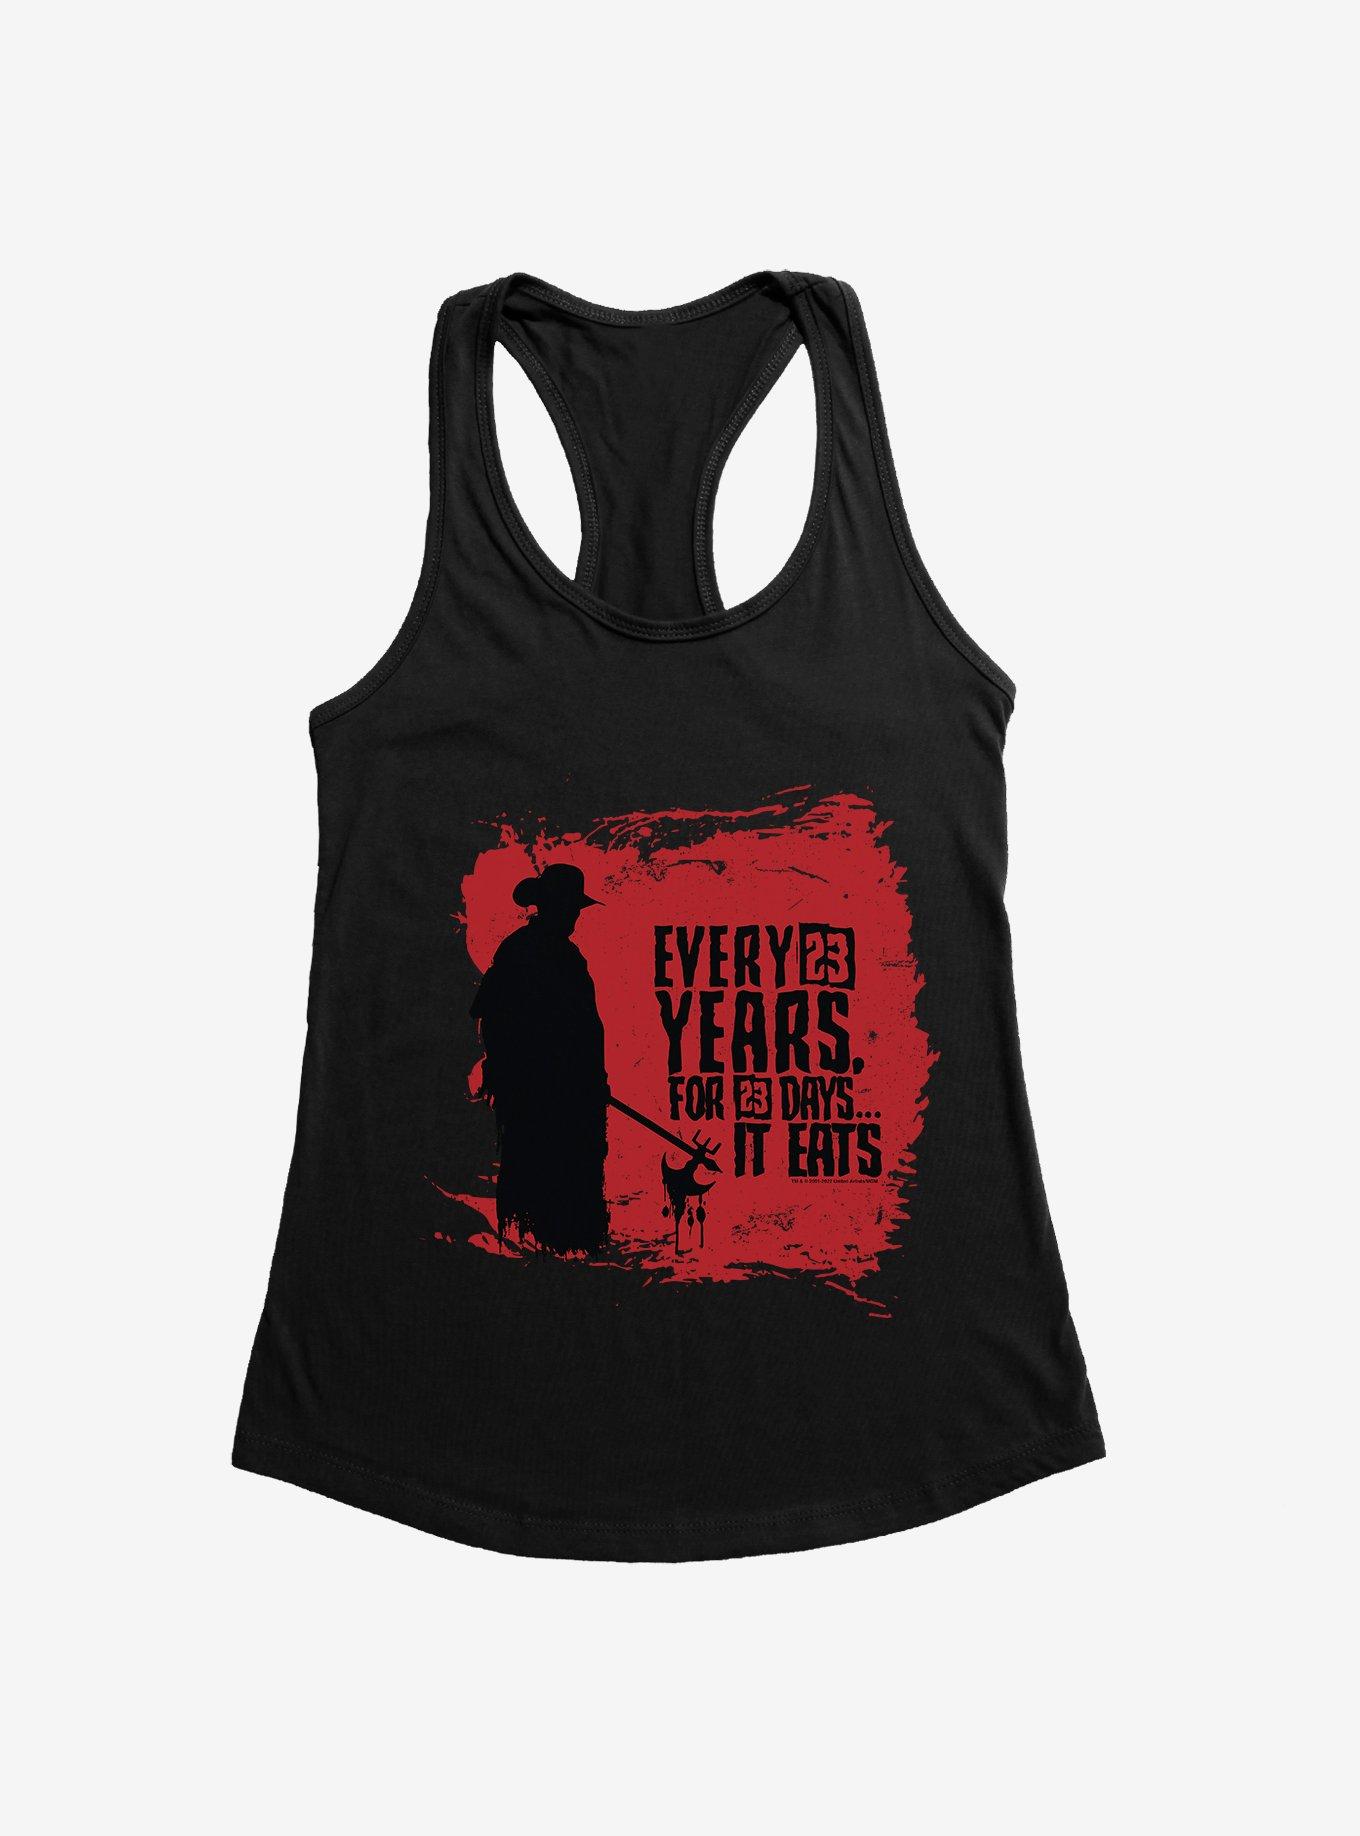 Jeepers Creepers It Eats Womens Tank Top, BLACK, hi-res